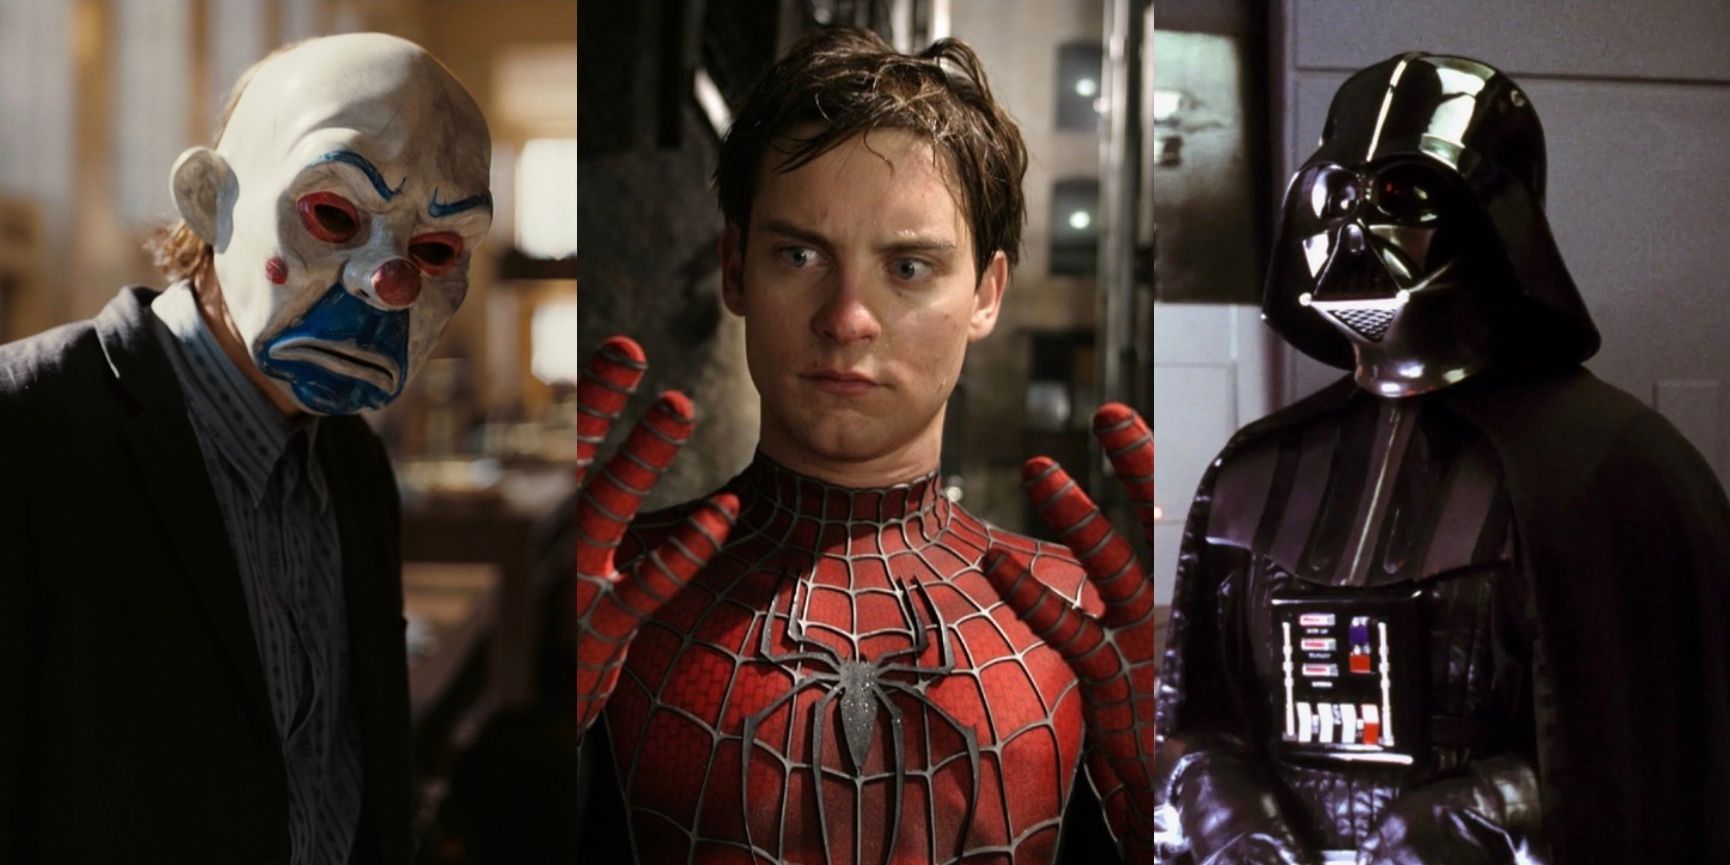 SEQUELS FEATURE IMAGE - THE DARK KNIGHT, SPIDER-MAN 2, THE EMPIRE STRIKES BACK